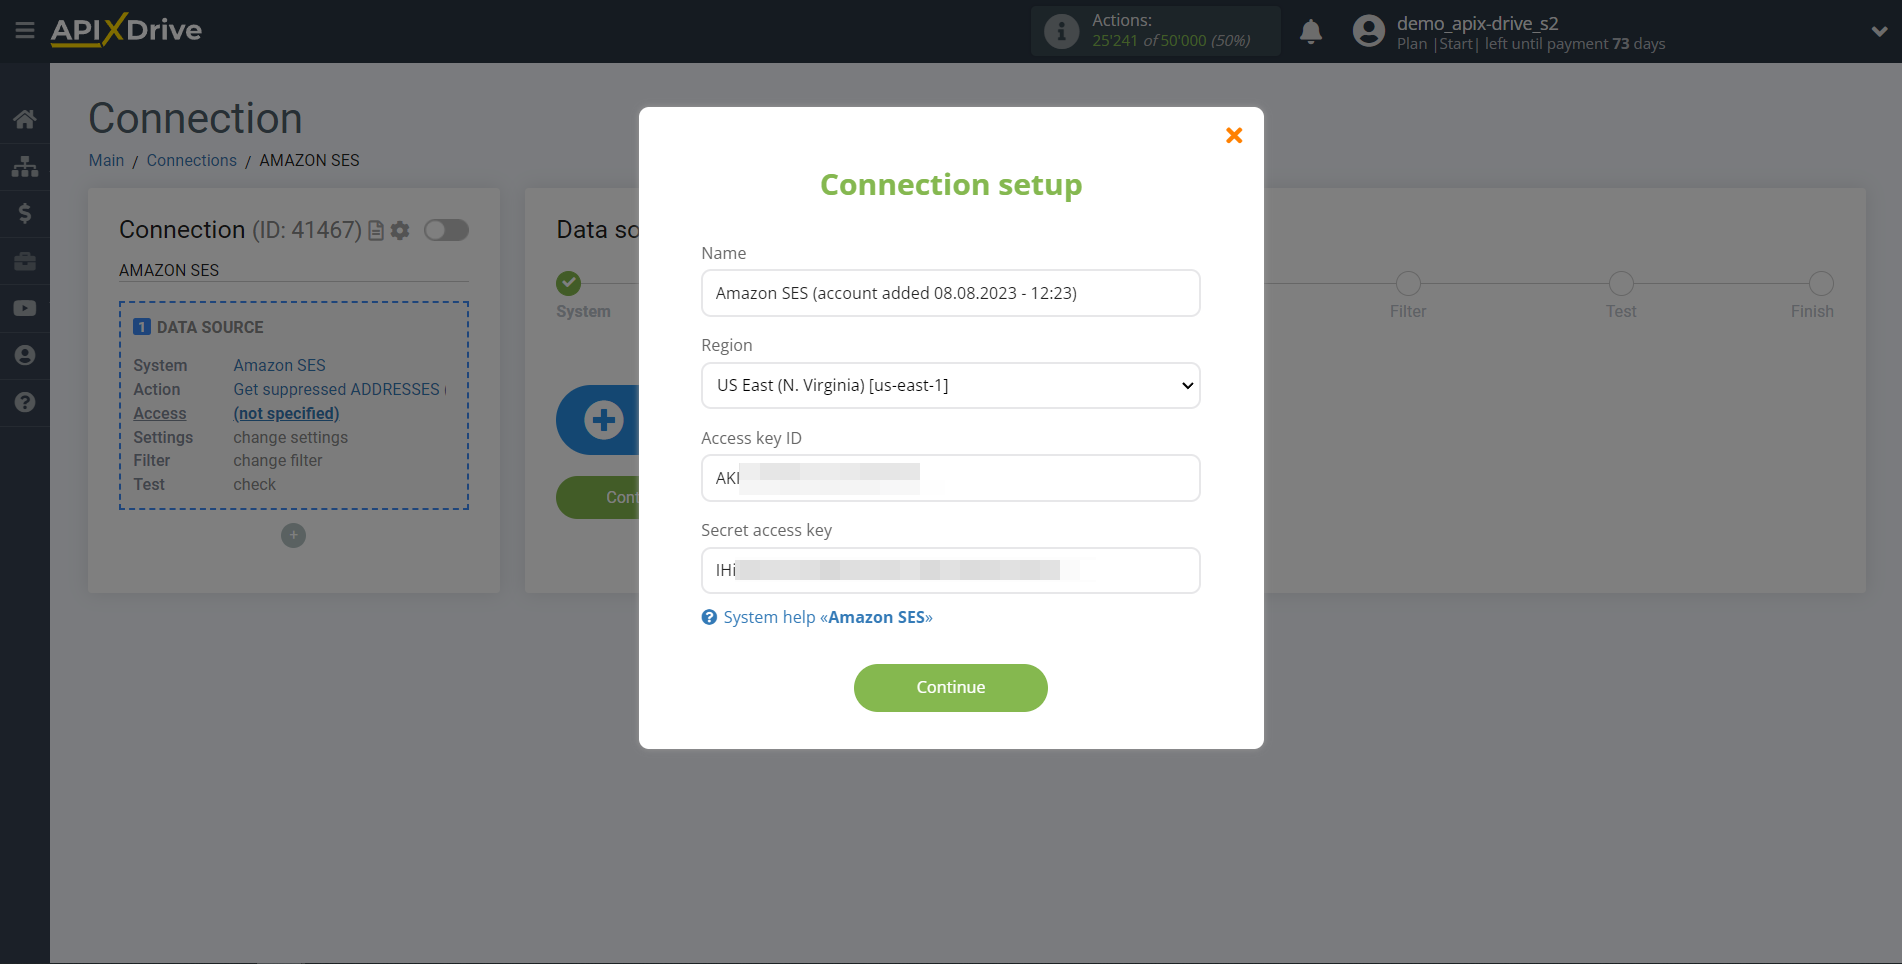 How to Connect Amazon SES as Data Source | Connection setup